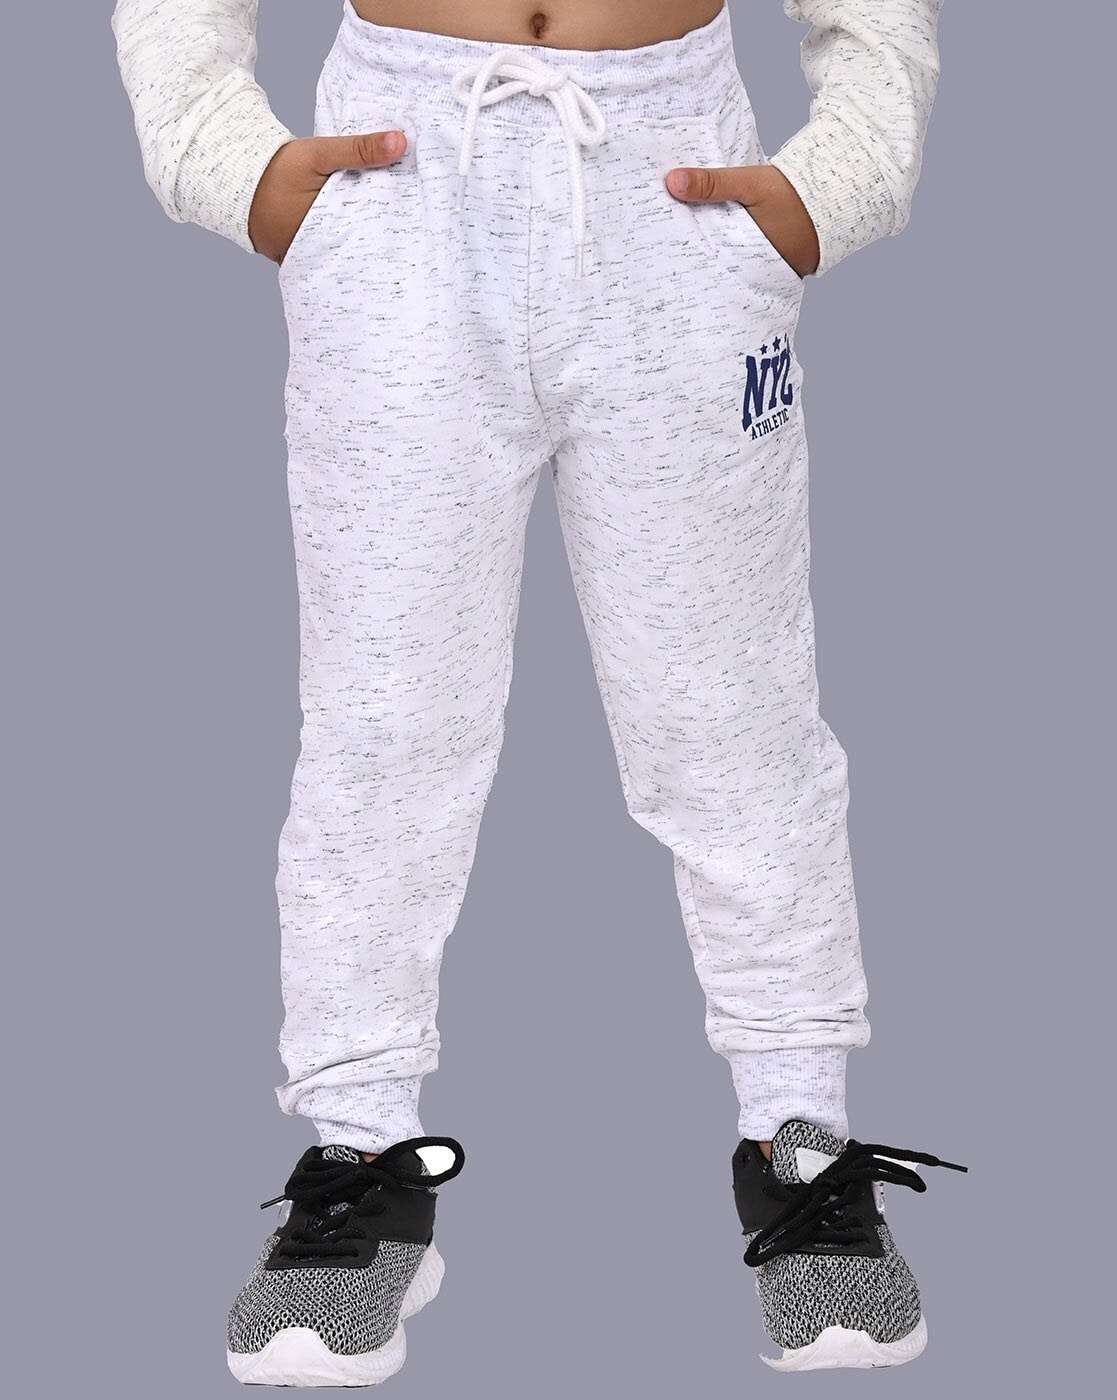 Details more than 81 top 10 track pants - in.eteachers